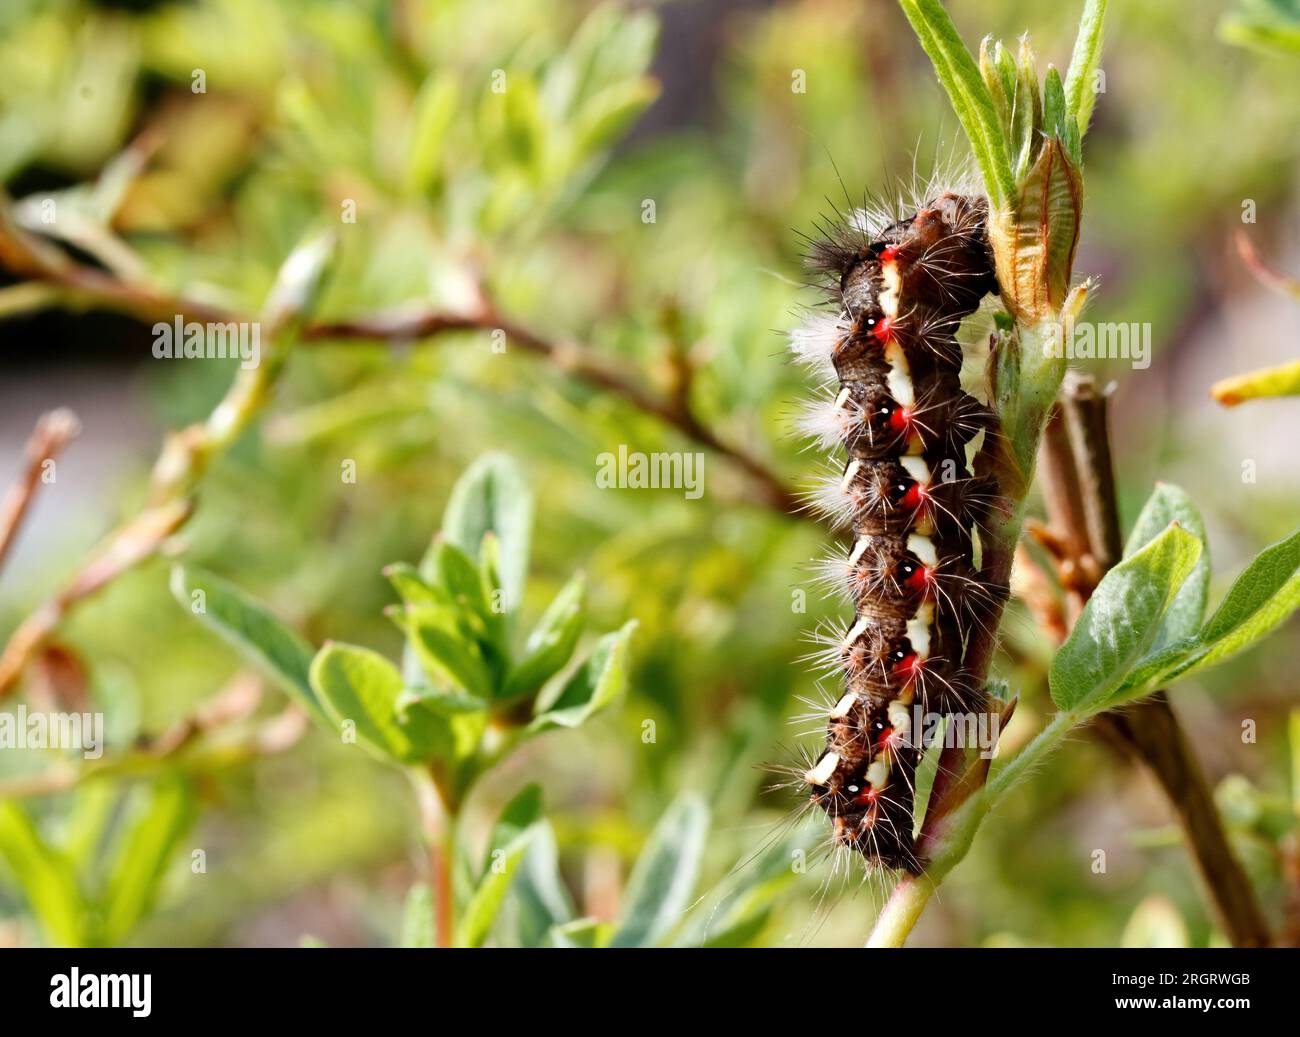 Hairy caterpillar of grass moth with red and white dots on cinquefoil branch Stock Photo